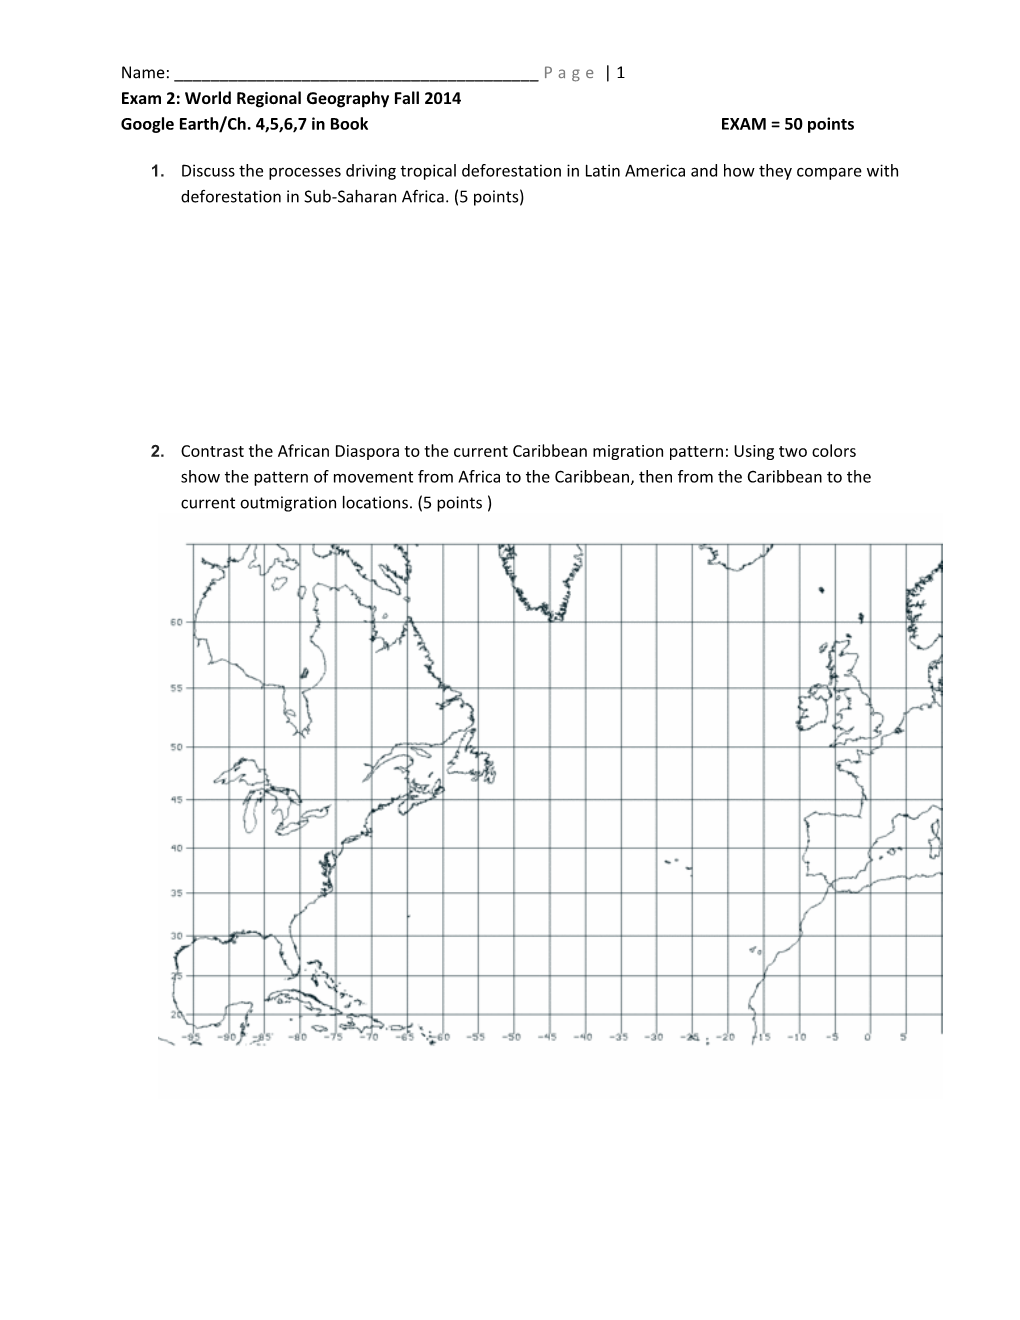 Name: ______Page 1 Exam 2: World Regional Geography Fall 2014 Google Earth/Ch. 4,5,6,7